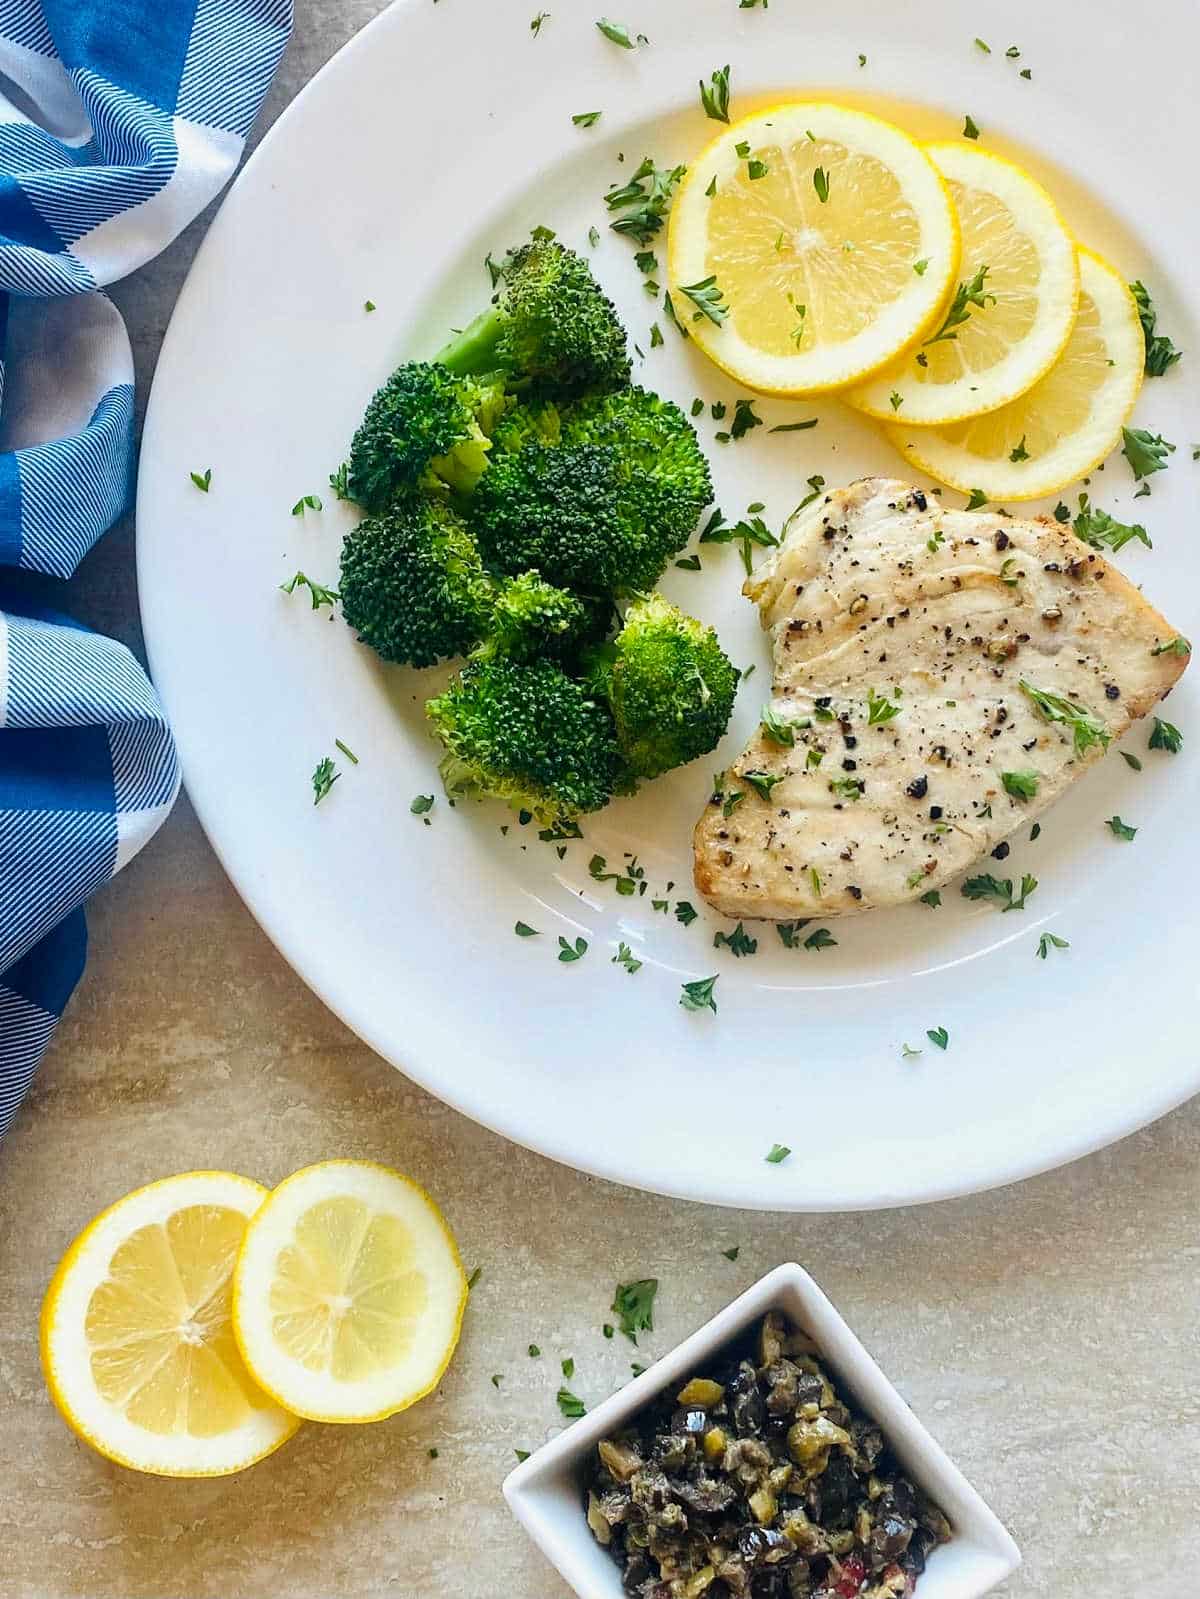 swordfish cooked in air fryer on a plate with lemon sliced and broccoli